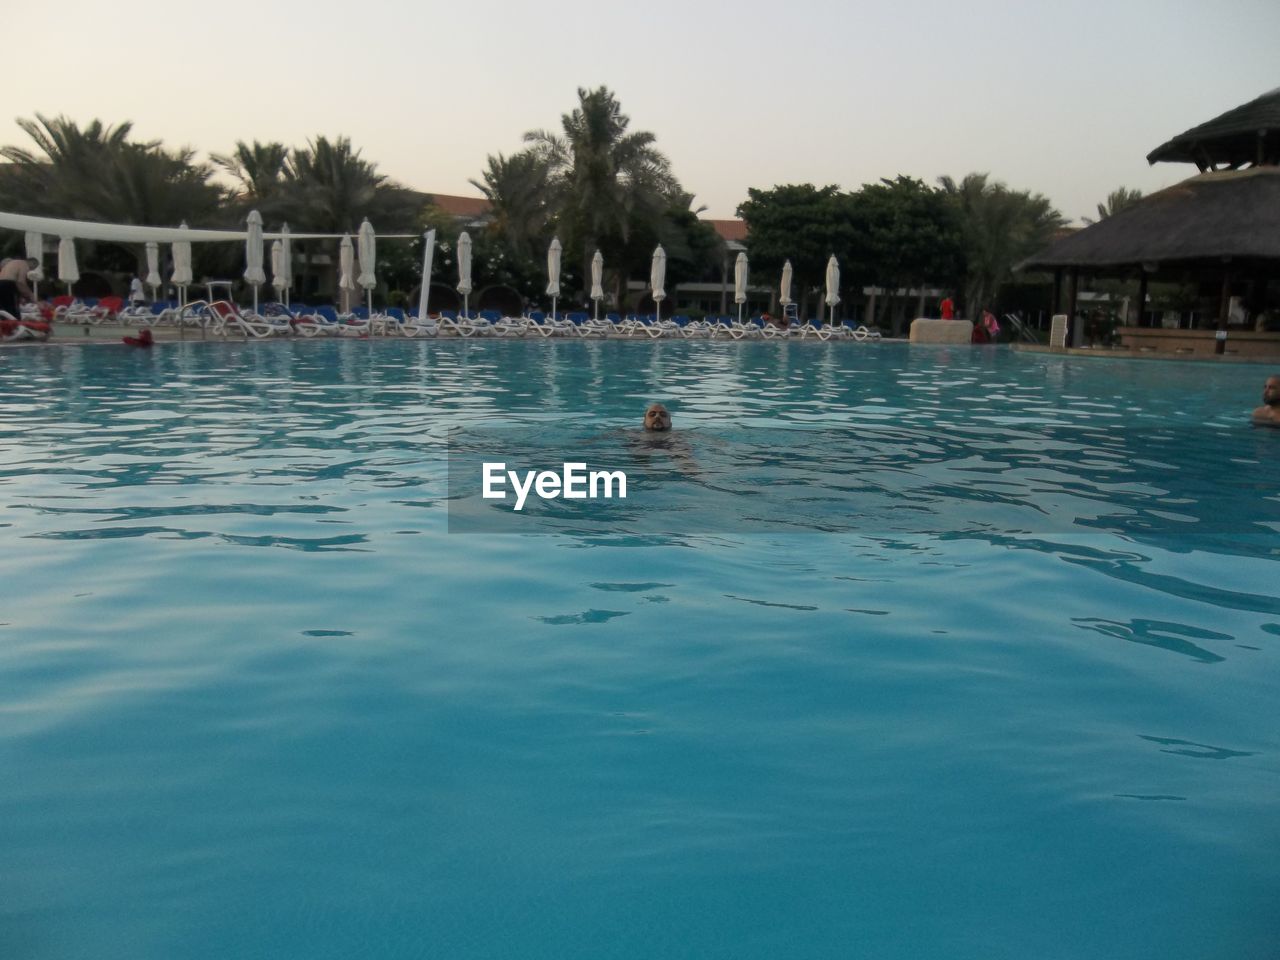 VIEW OF SWIMMING POOL IN PARK